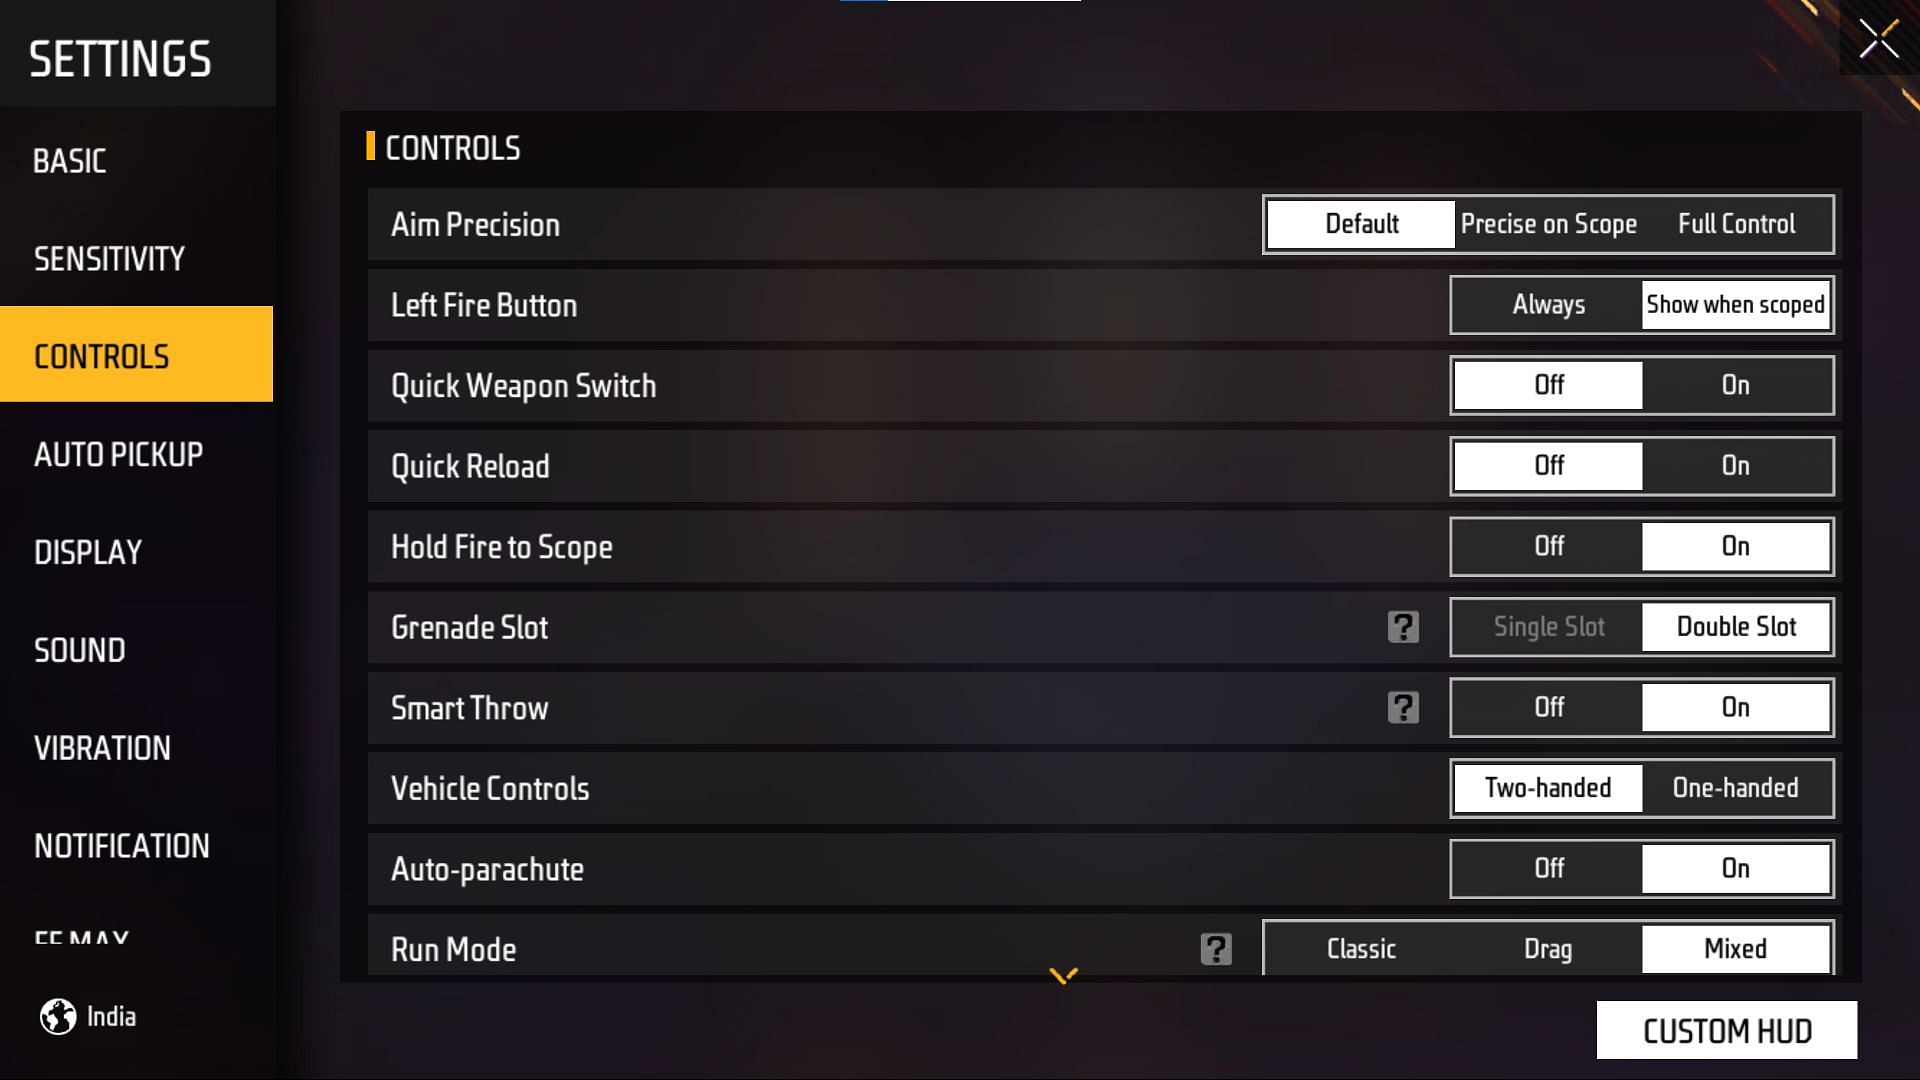 Controls can be edited based on the overall comfort while playing (Image via Garena)